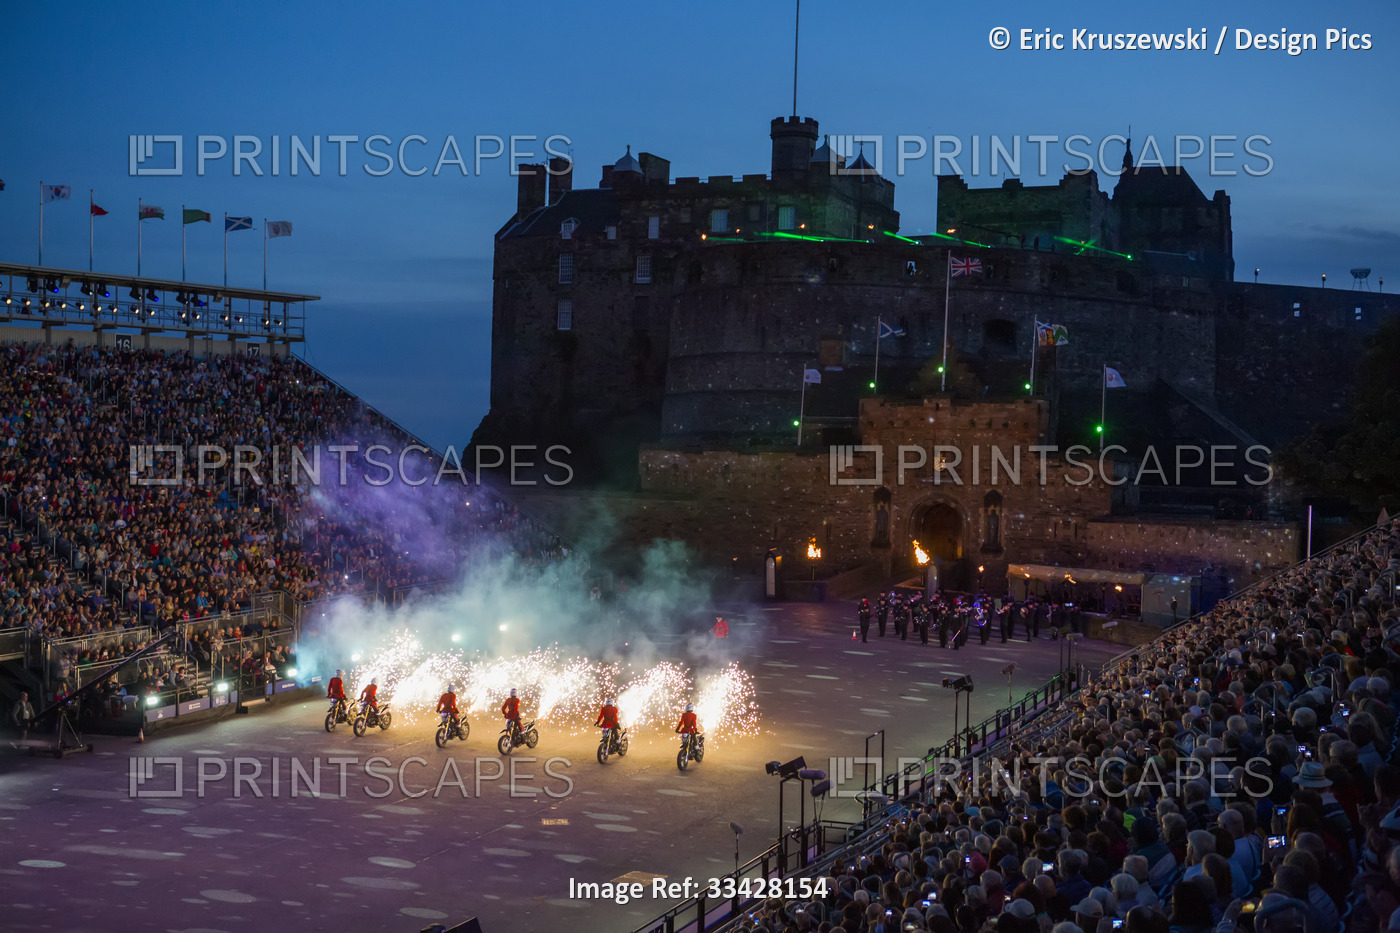 During the annual Military Tattoo in Edinburgh, Scotland, motorcycle stunt ...